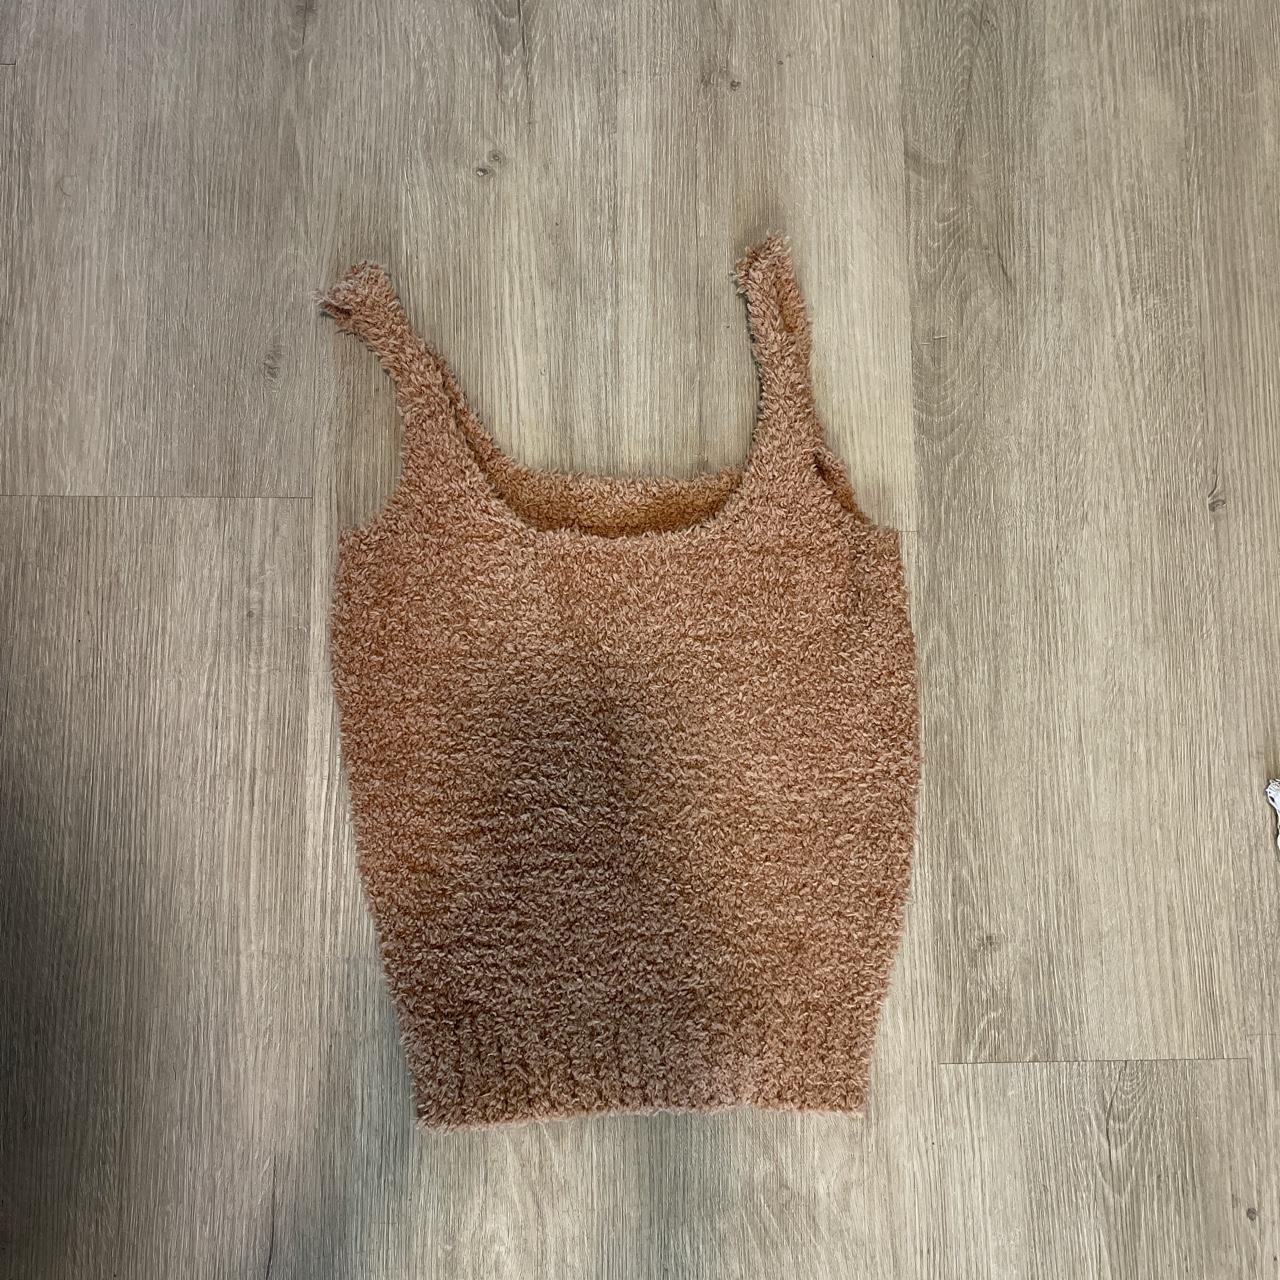 Skims Cozy Knit Top and Short SET! S/M size for - Depop